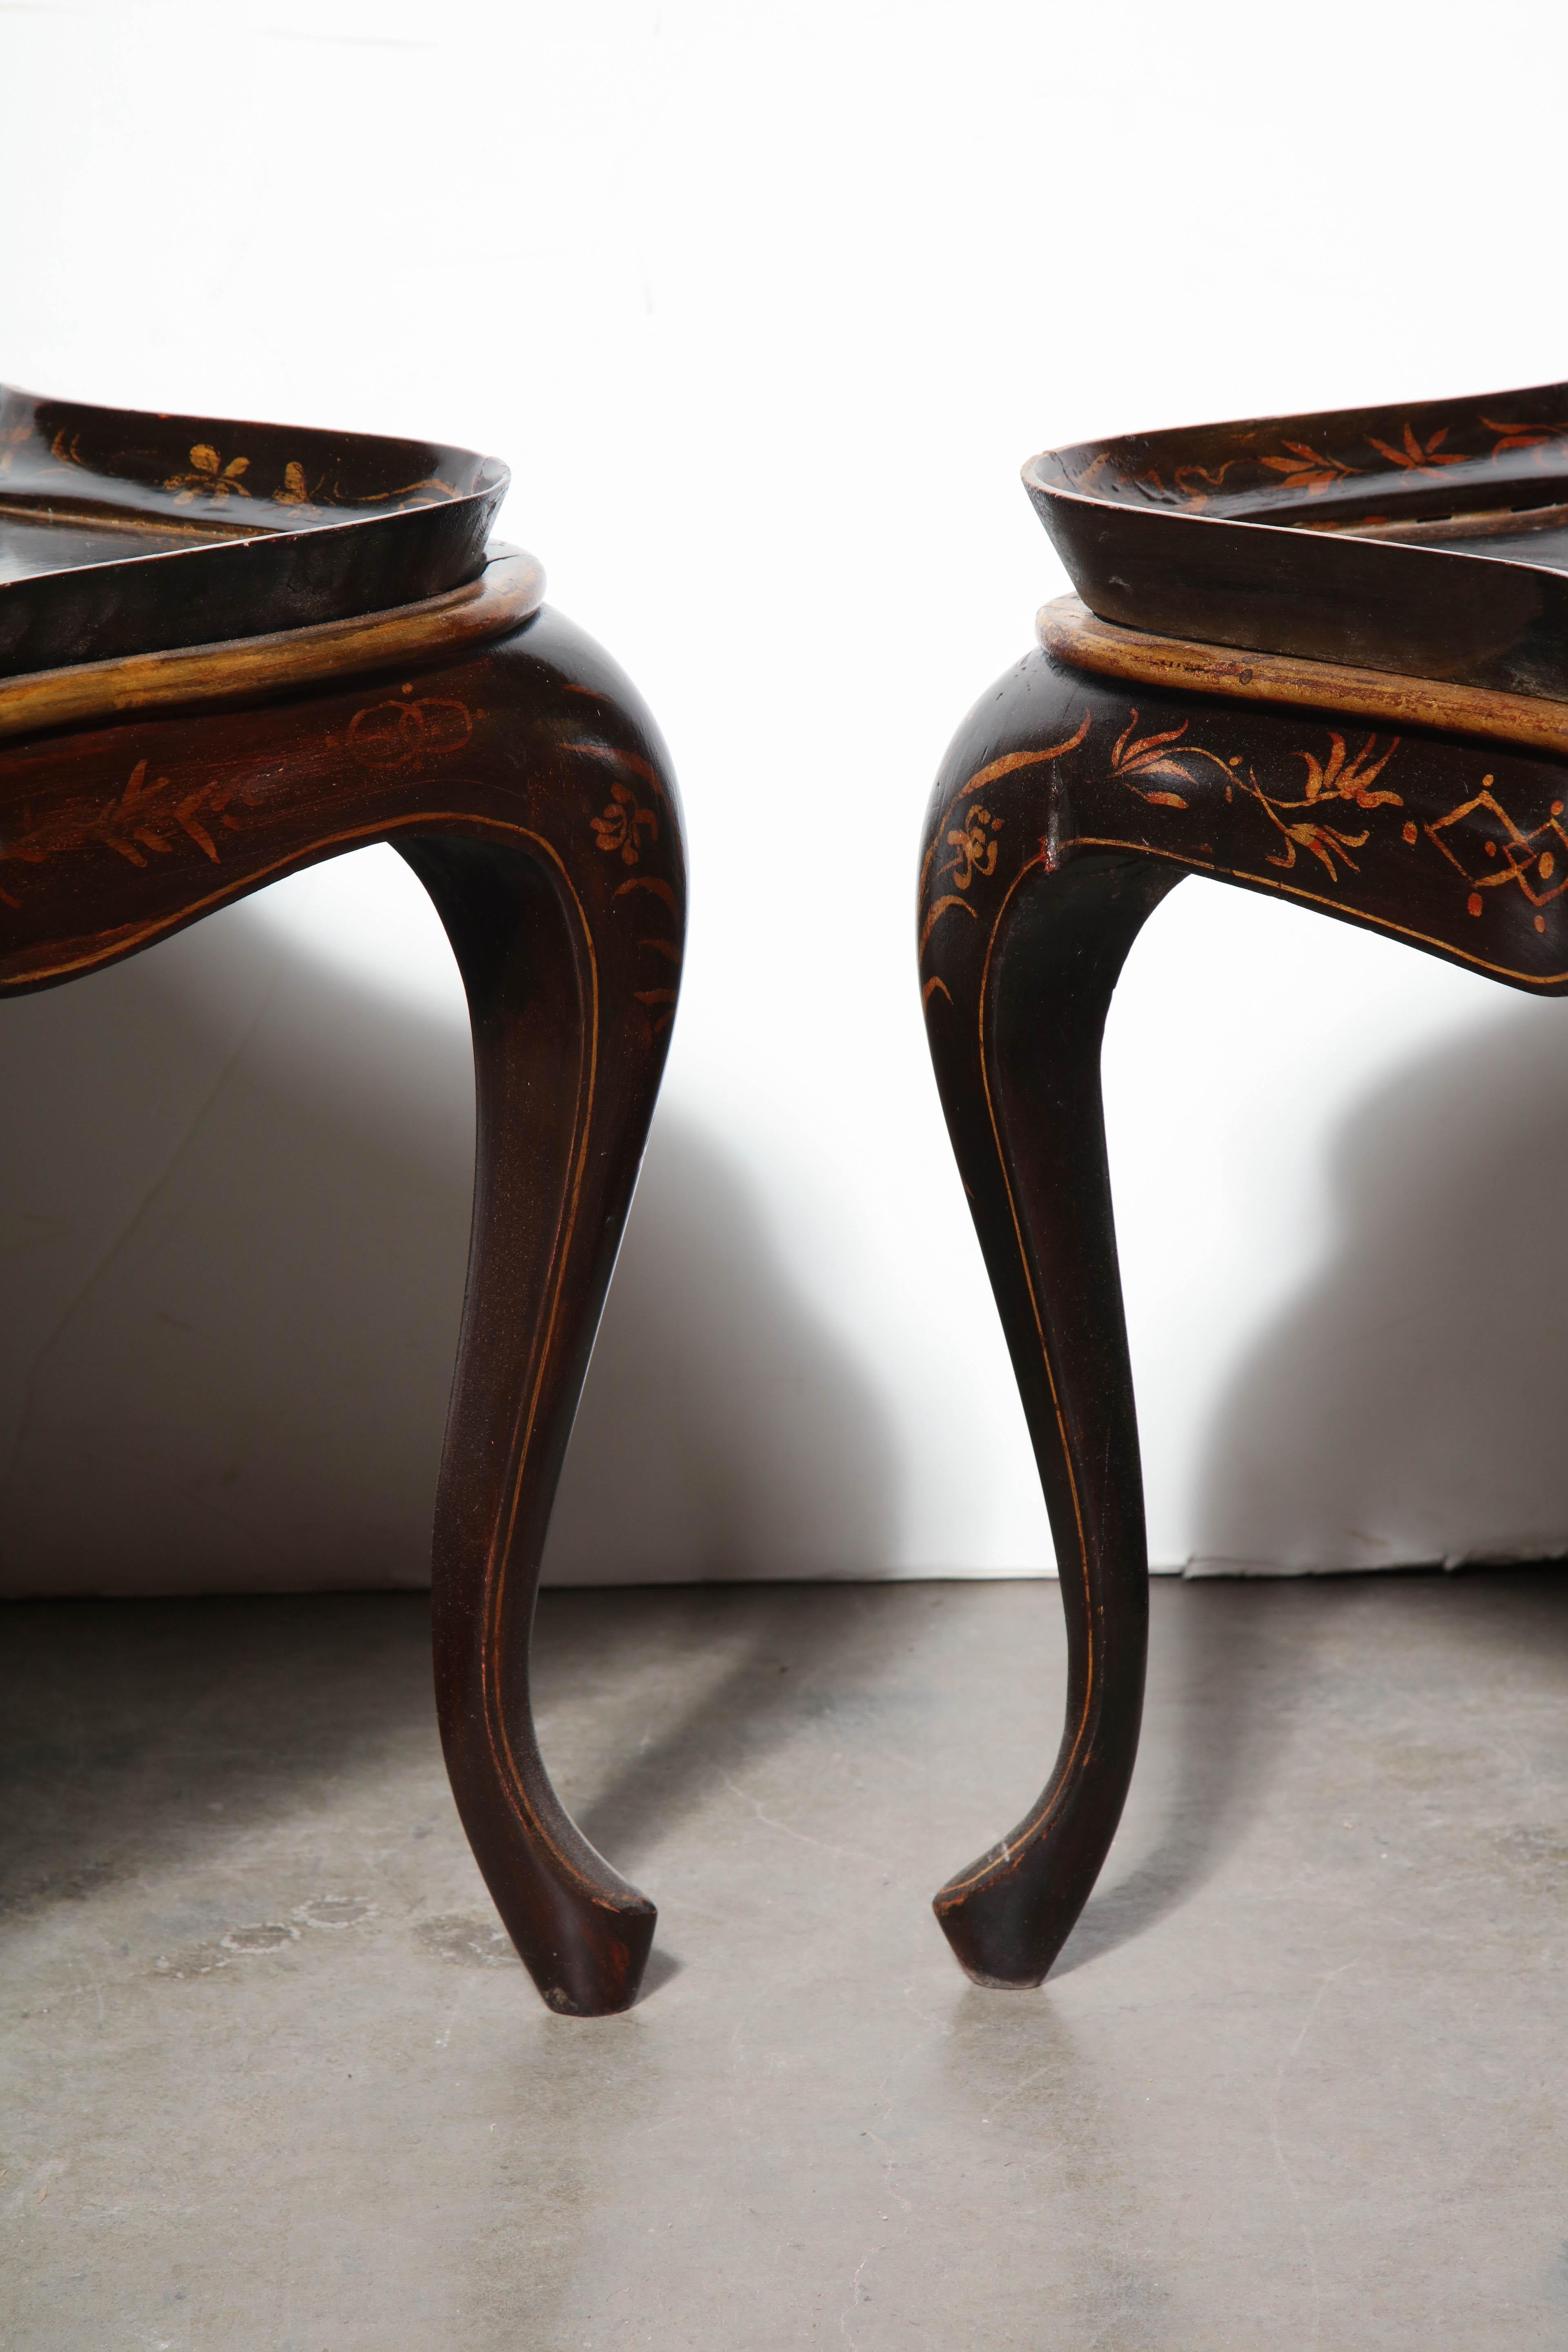 Two Chinese Lacquered Coffee Tables 3